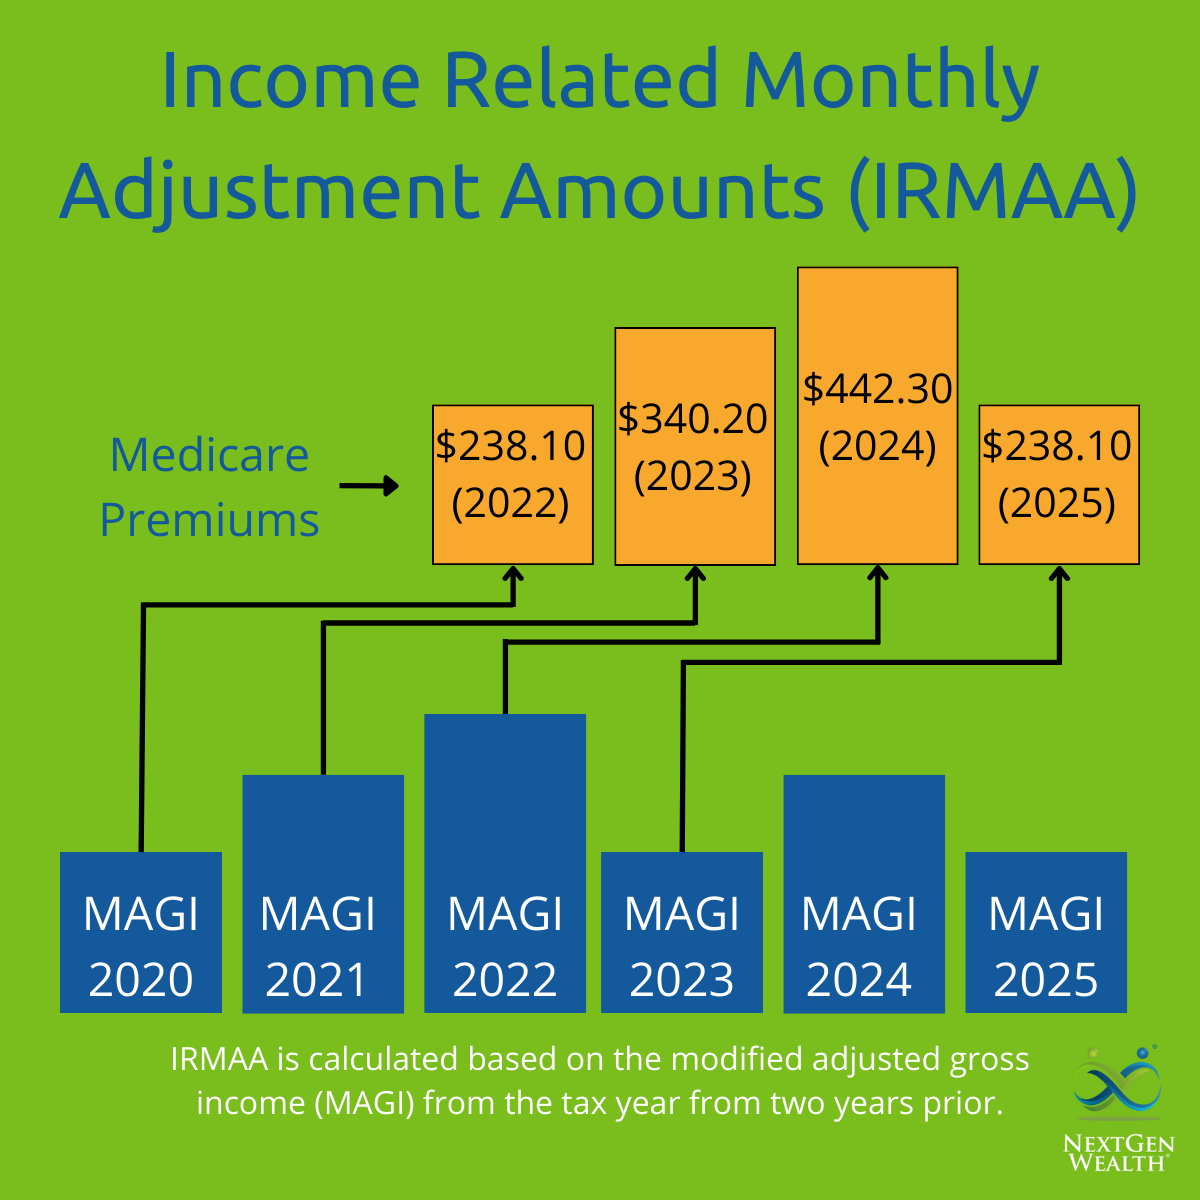 Related Monthly Adjustment Amounts (IRMAA) and Medicare Premiums